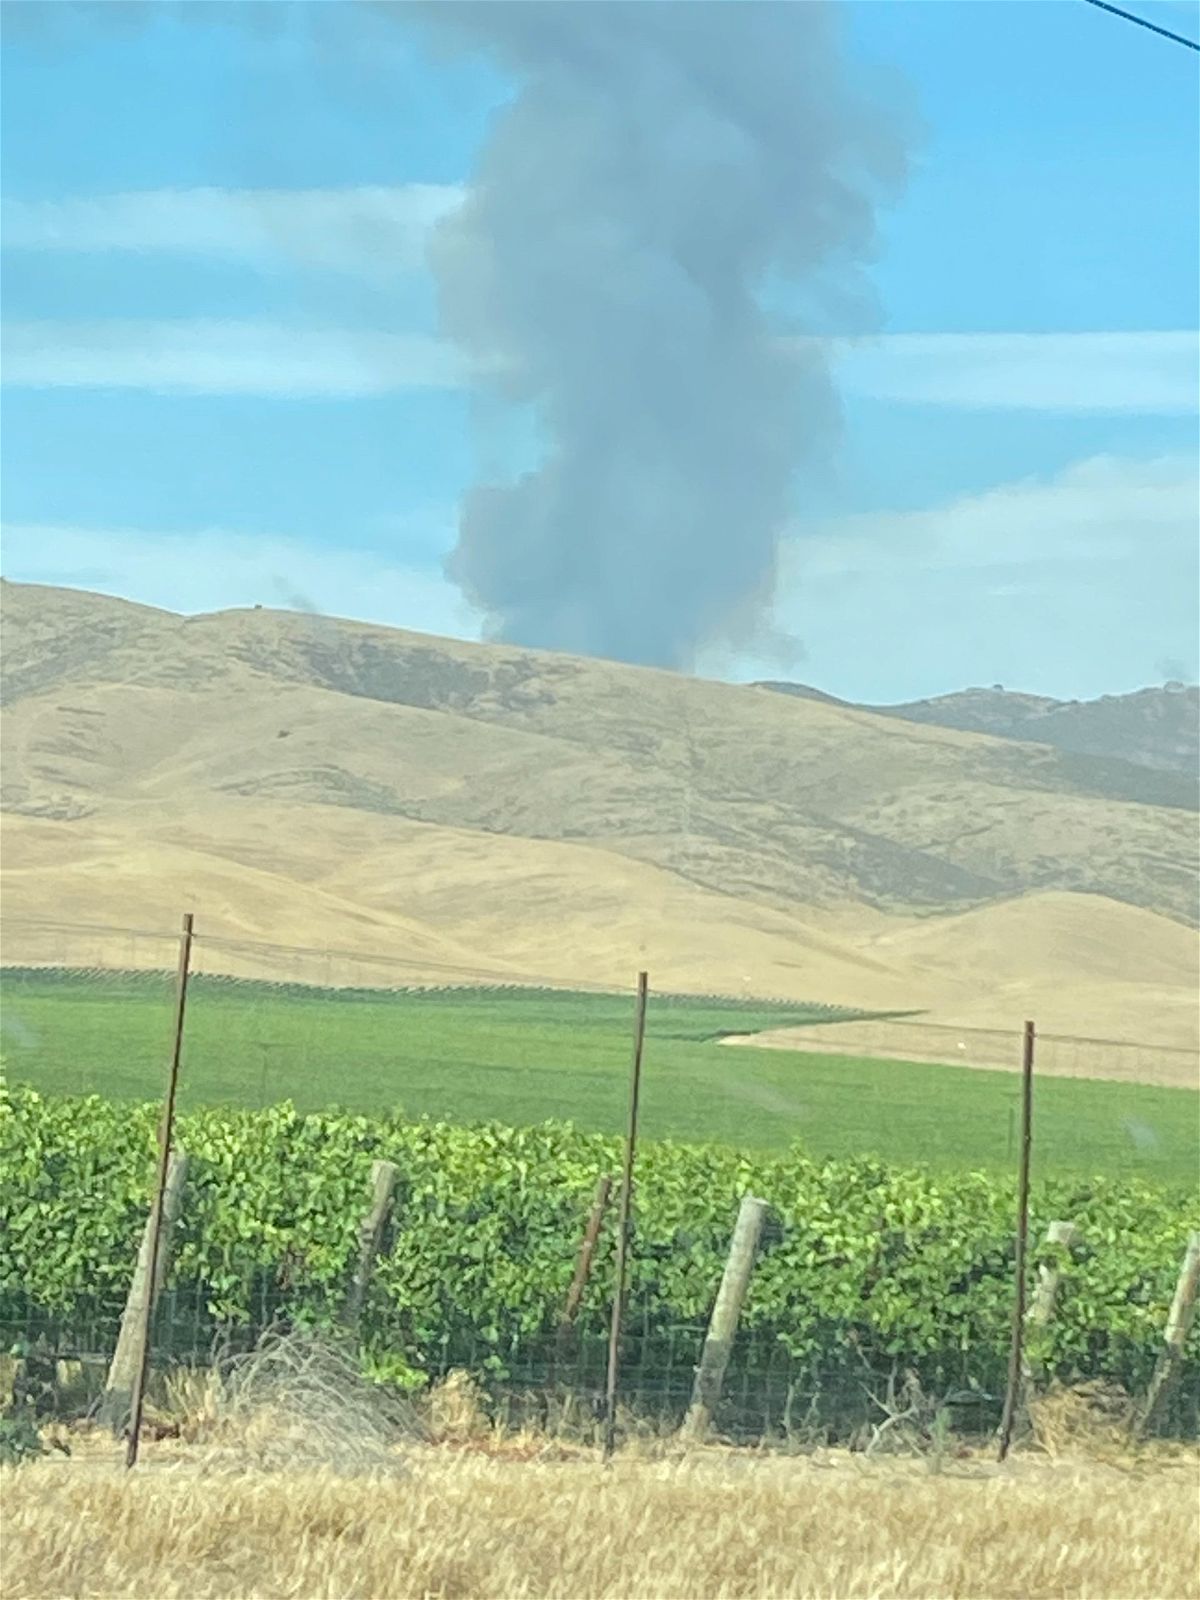 A photo shared with KION of a fire burning near Highway 146. Photo date 7/28/2021.